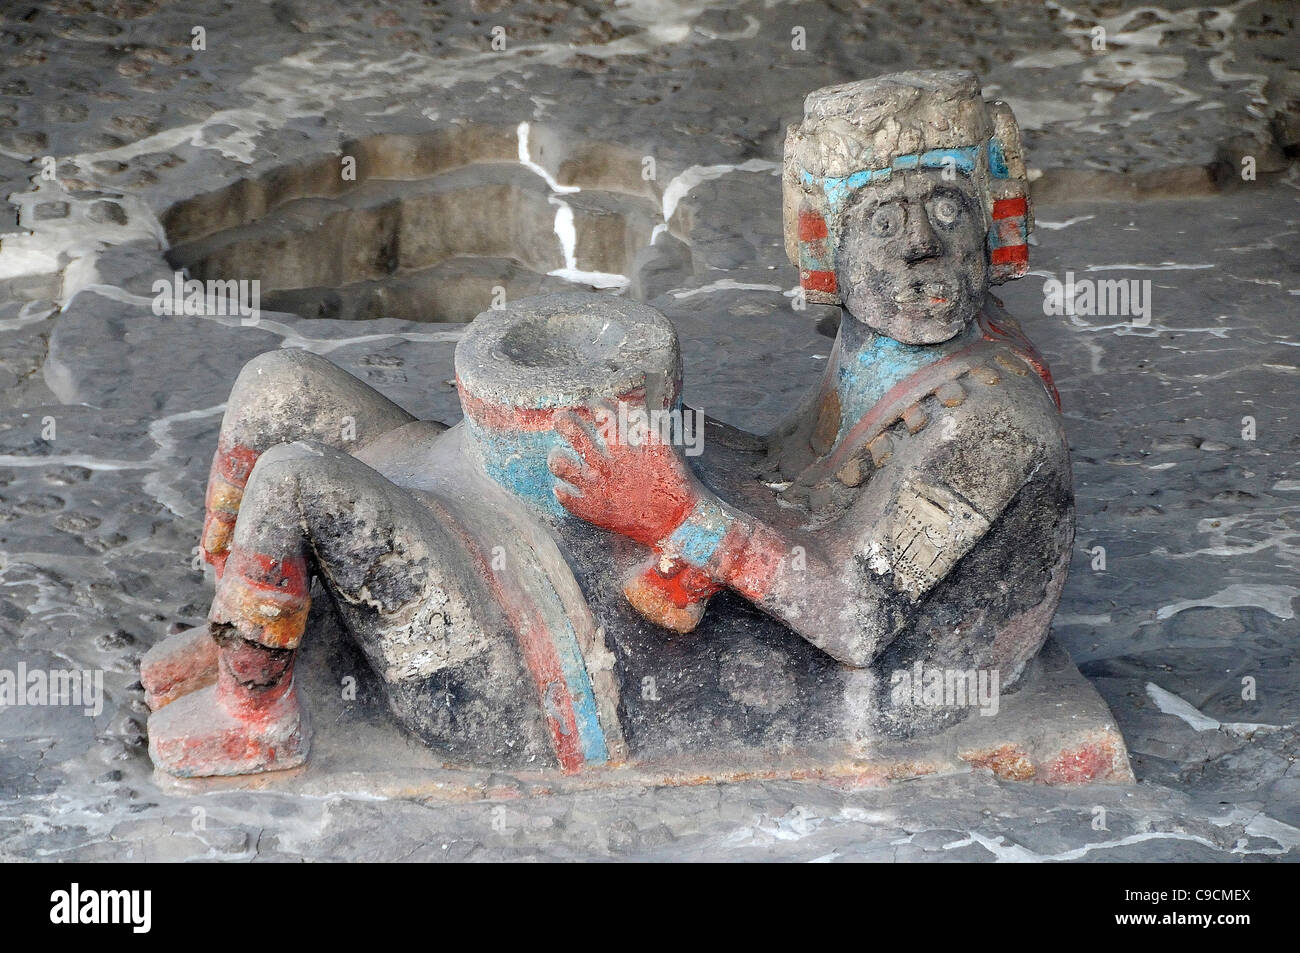 Mexico, Federal District, Mexico City, Chac Mool figure at the entrance to Tlaloc Shrine in the Templo Mayor Aztec temple ruins. Stock Photo